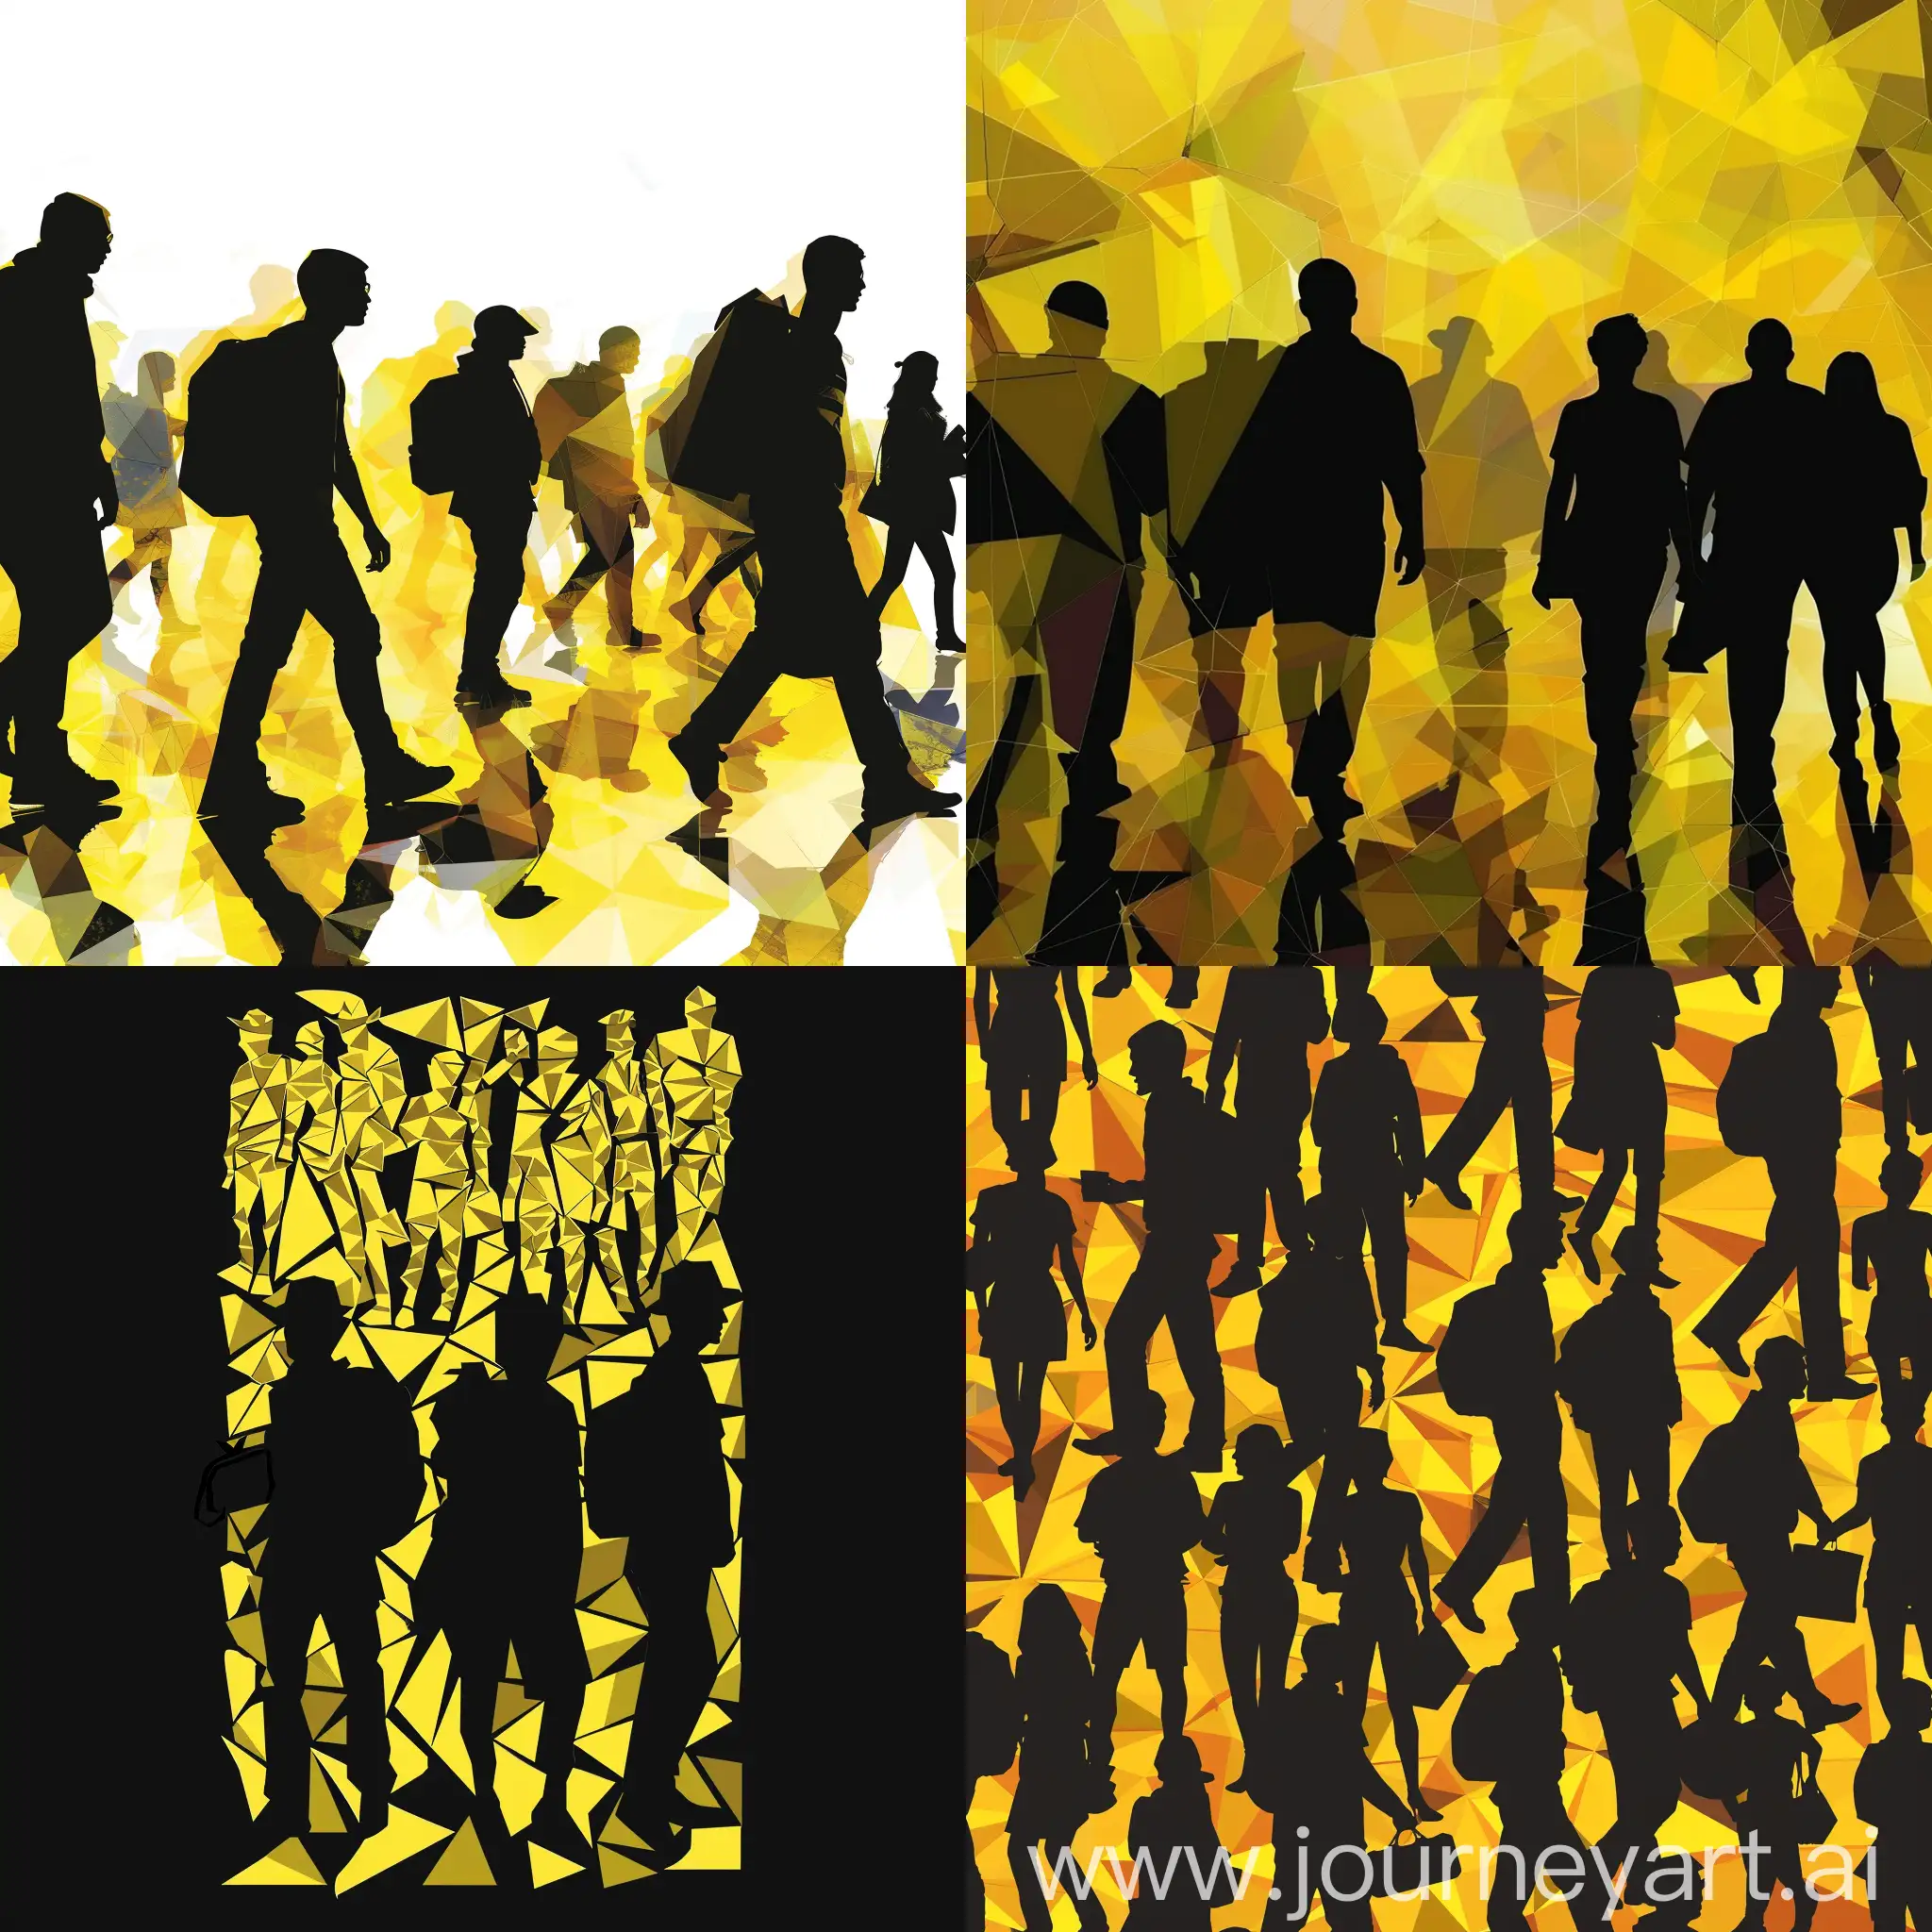 Silhouette of yellow polygons of tourists. The image has a tourist context